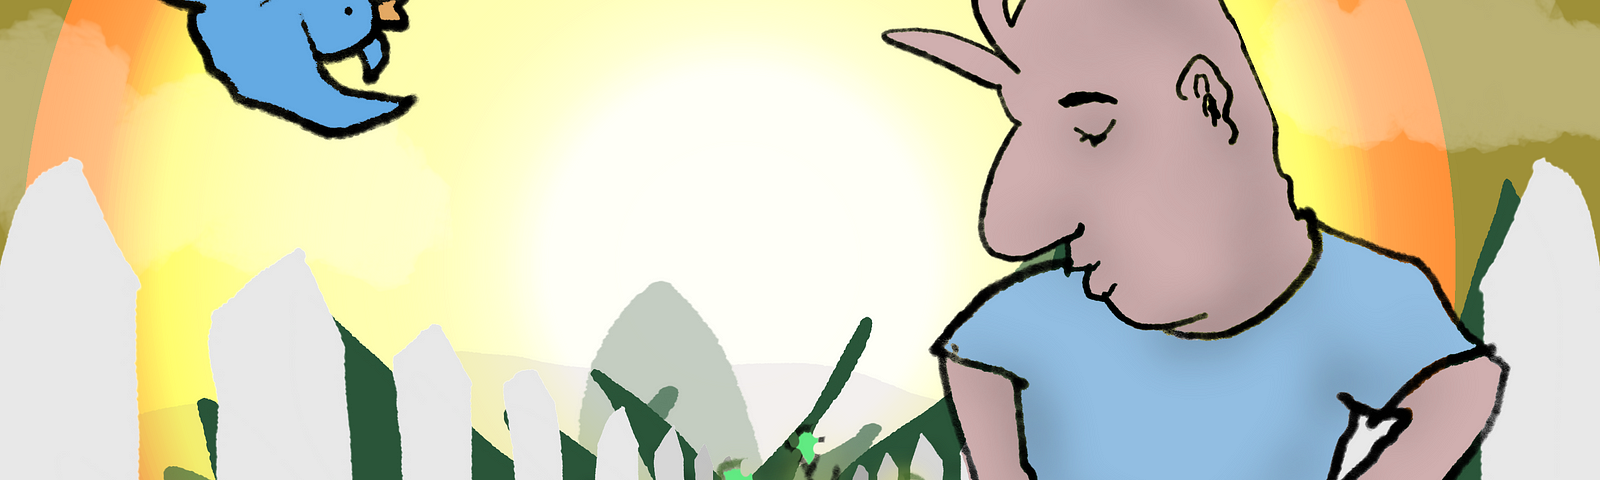 A cartoon of a guy watching a sapling grow in a narrow lane. There is a picket fence disappearing into the distance on either side of the grassy lane. A blue bird is kibbitzing. The dude is wearing a light blue t-shirt and navy shorts and very stylish white ankle socks. A low sun radiates in the background, but whether it is sunrise or sunset is more or less unimportant to the story. Art by Doodleslice 2024.